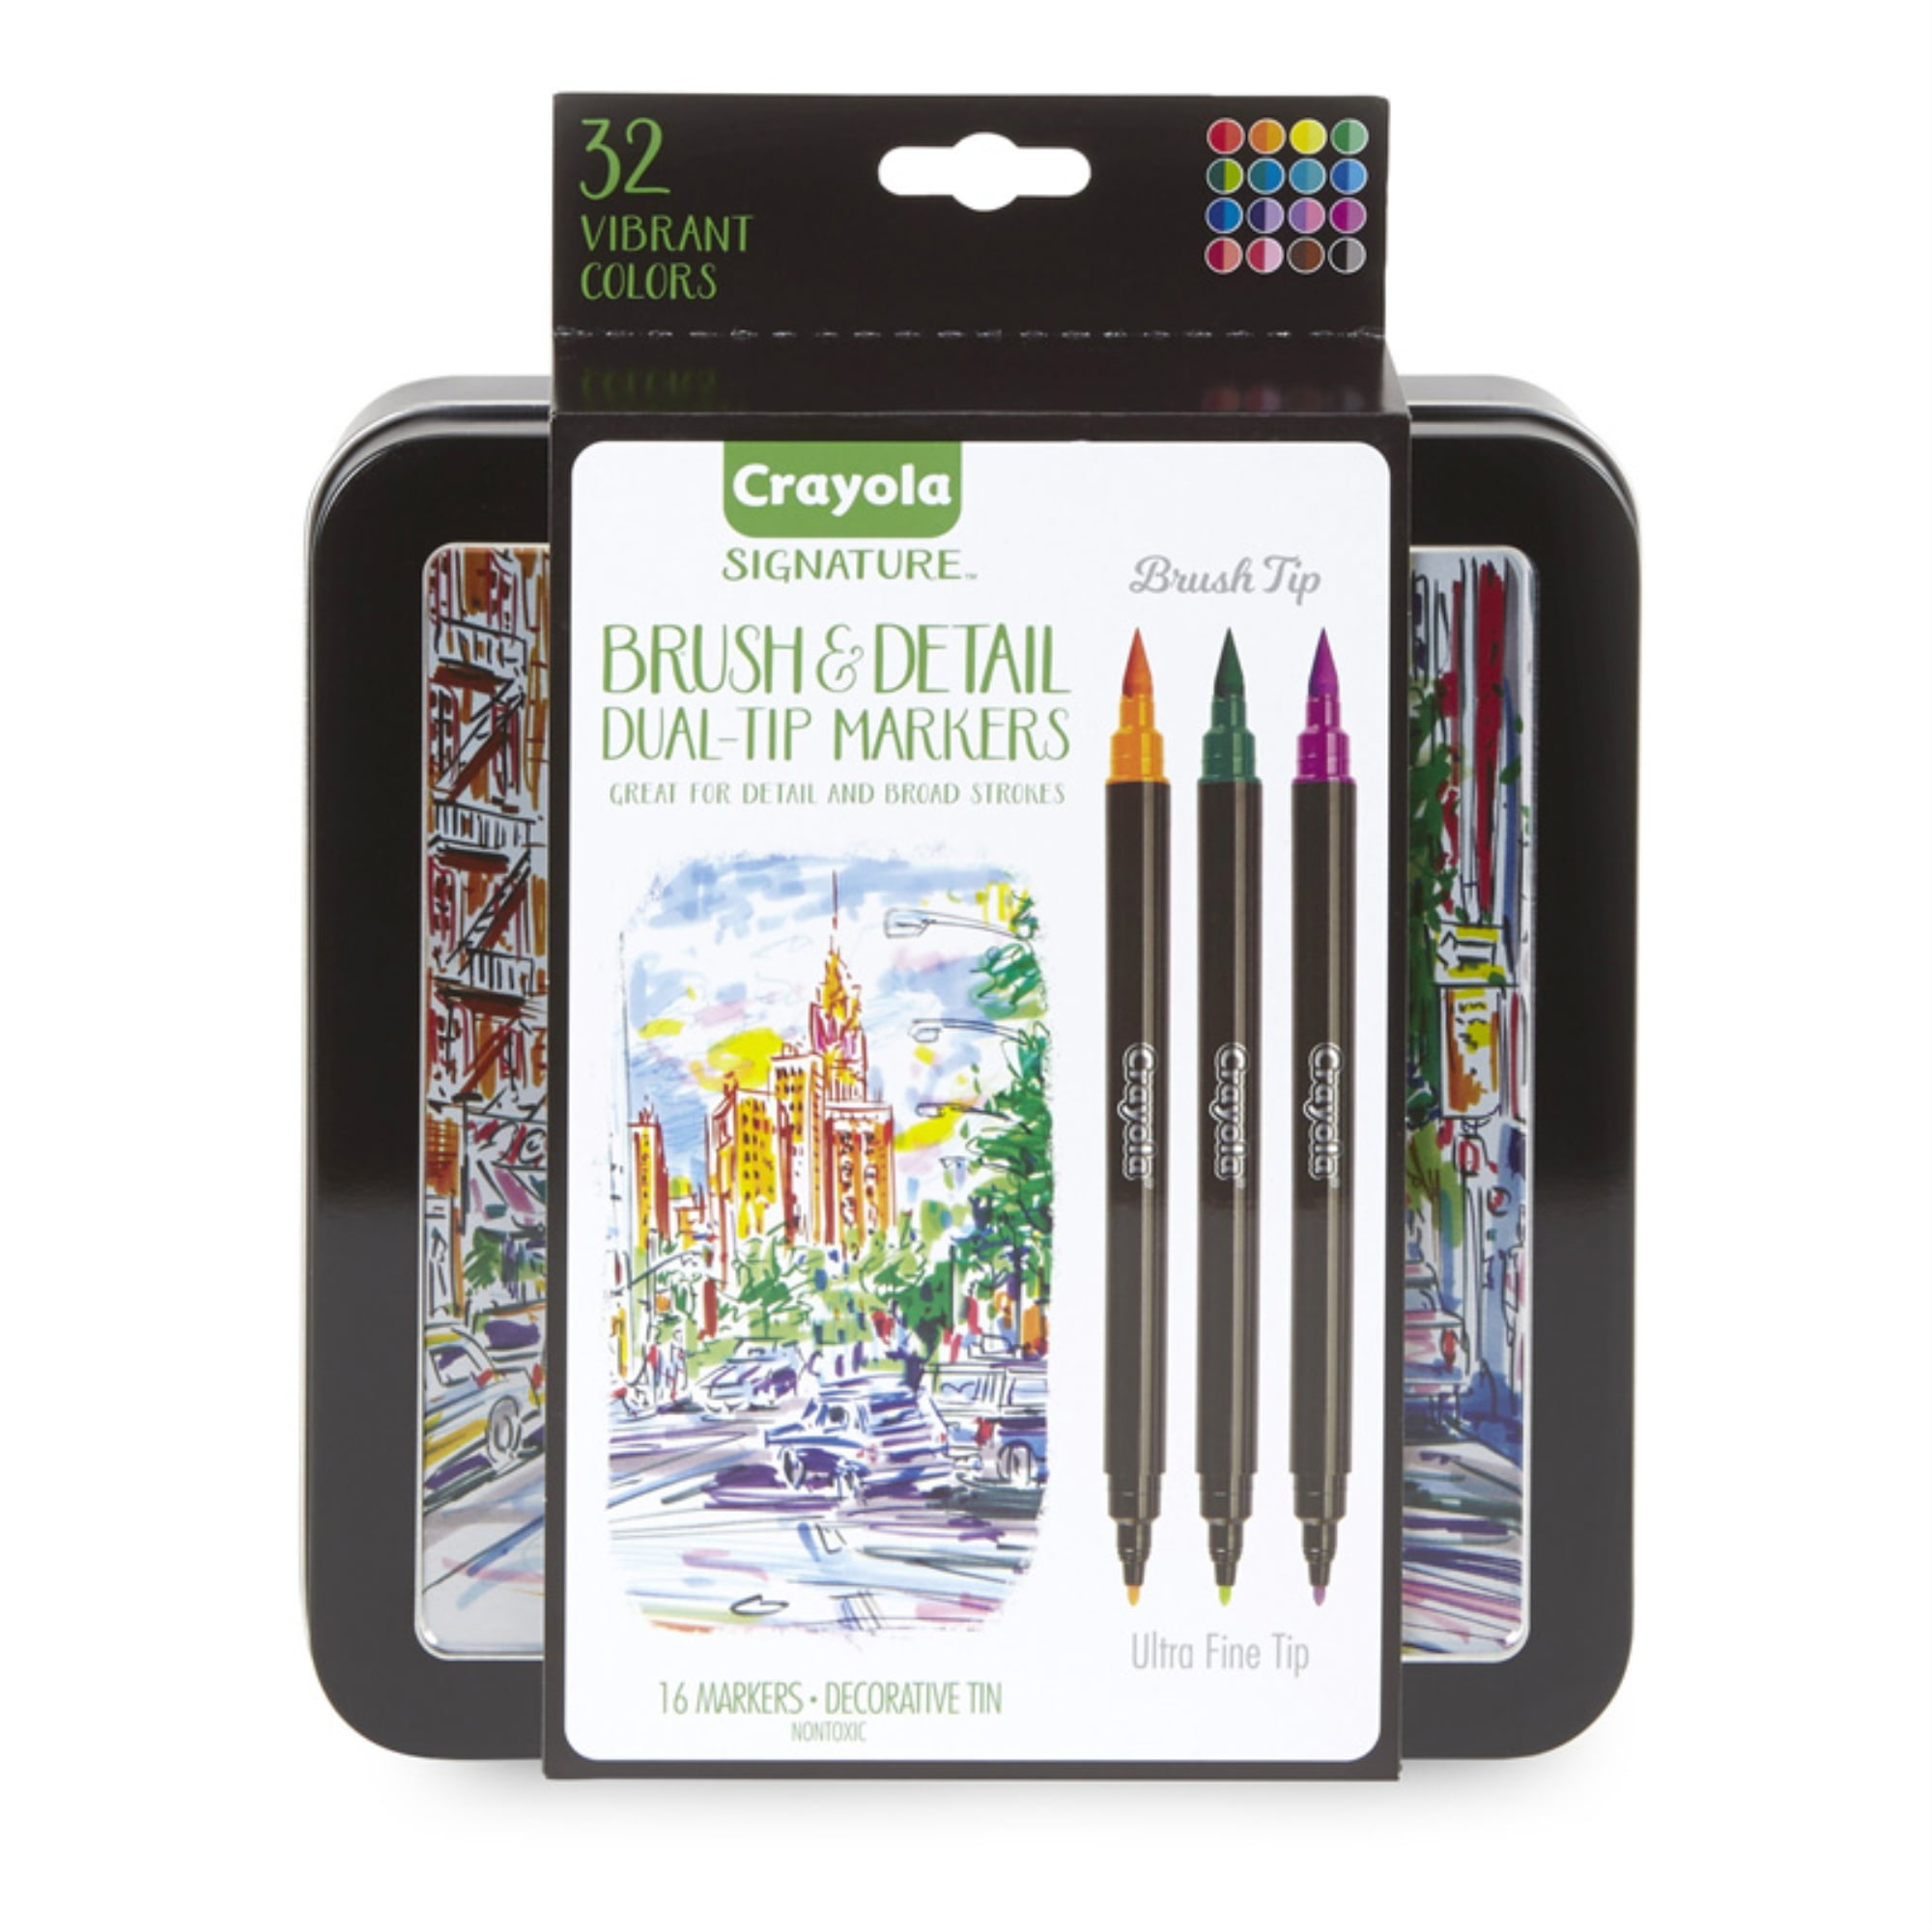 Royal & Langnickel - 24pc Dual Tip Waterbased Artist Markers - Brush Tip  and Fineliner 